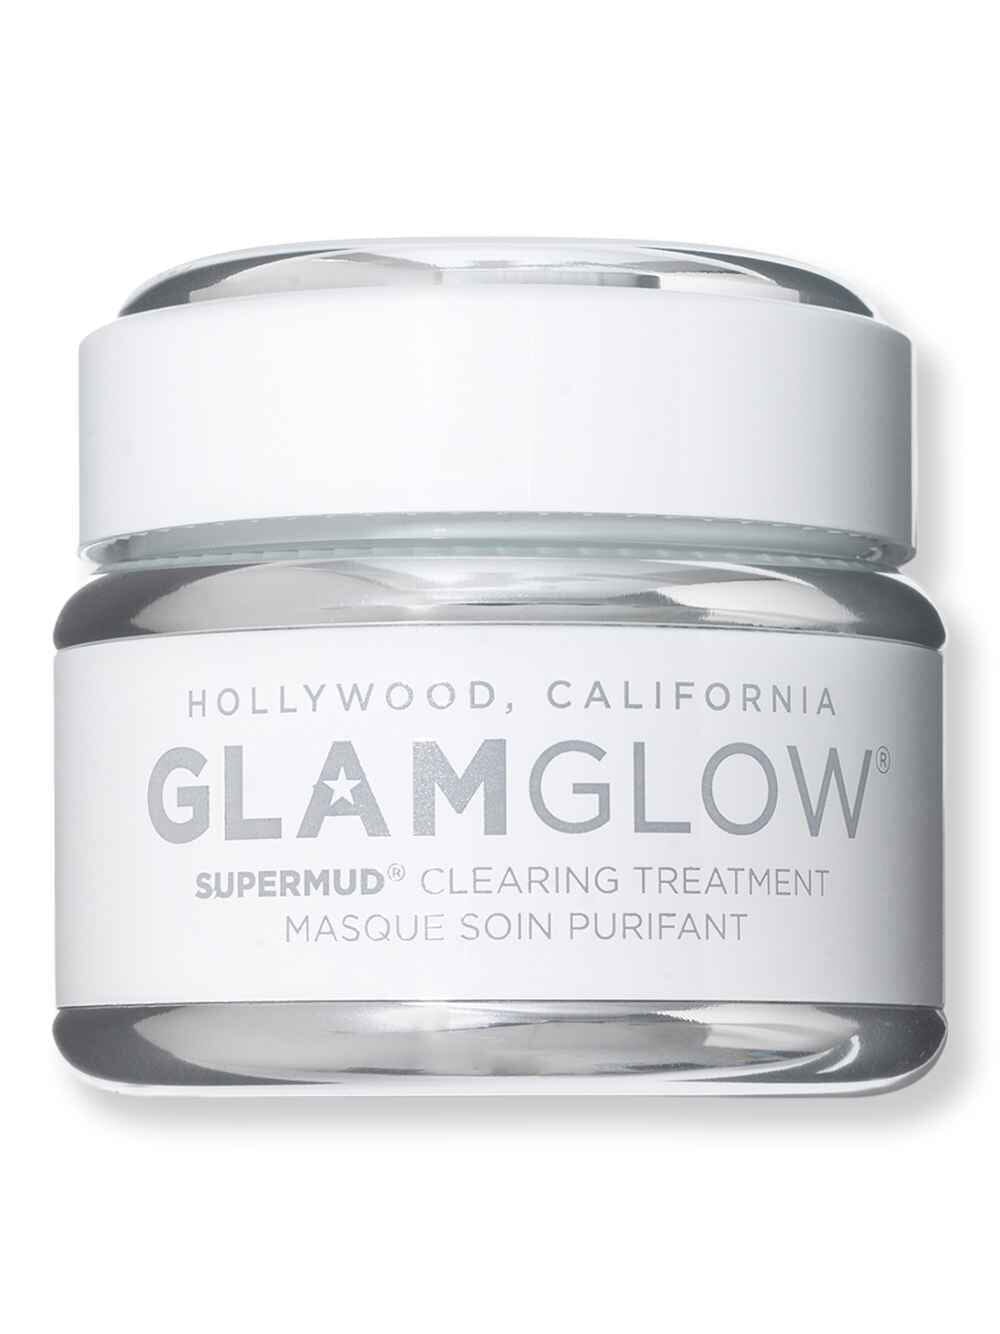 Glamglow Glamglow SuperMud Clearing Treatment 1.7 oz50 g Face Masks 